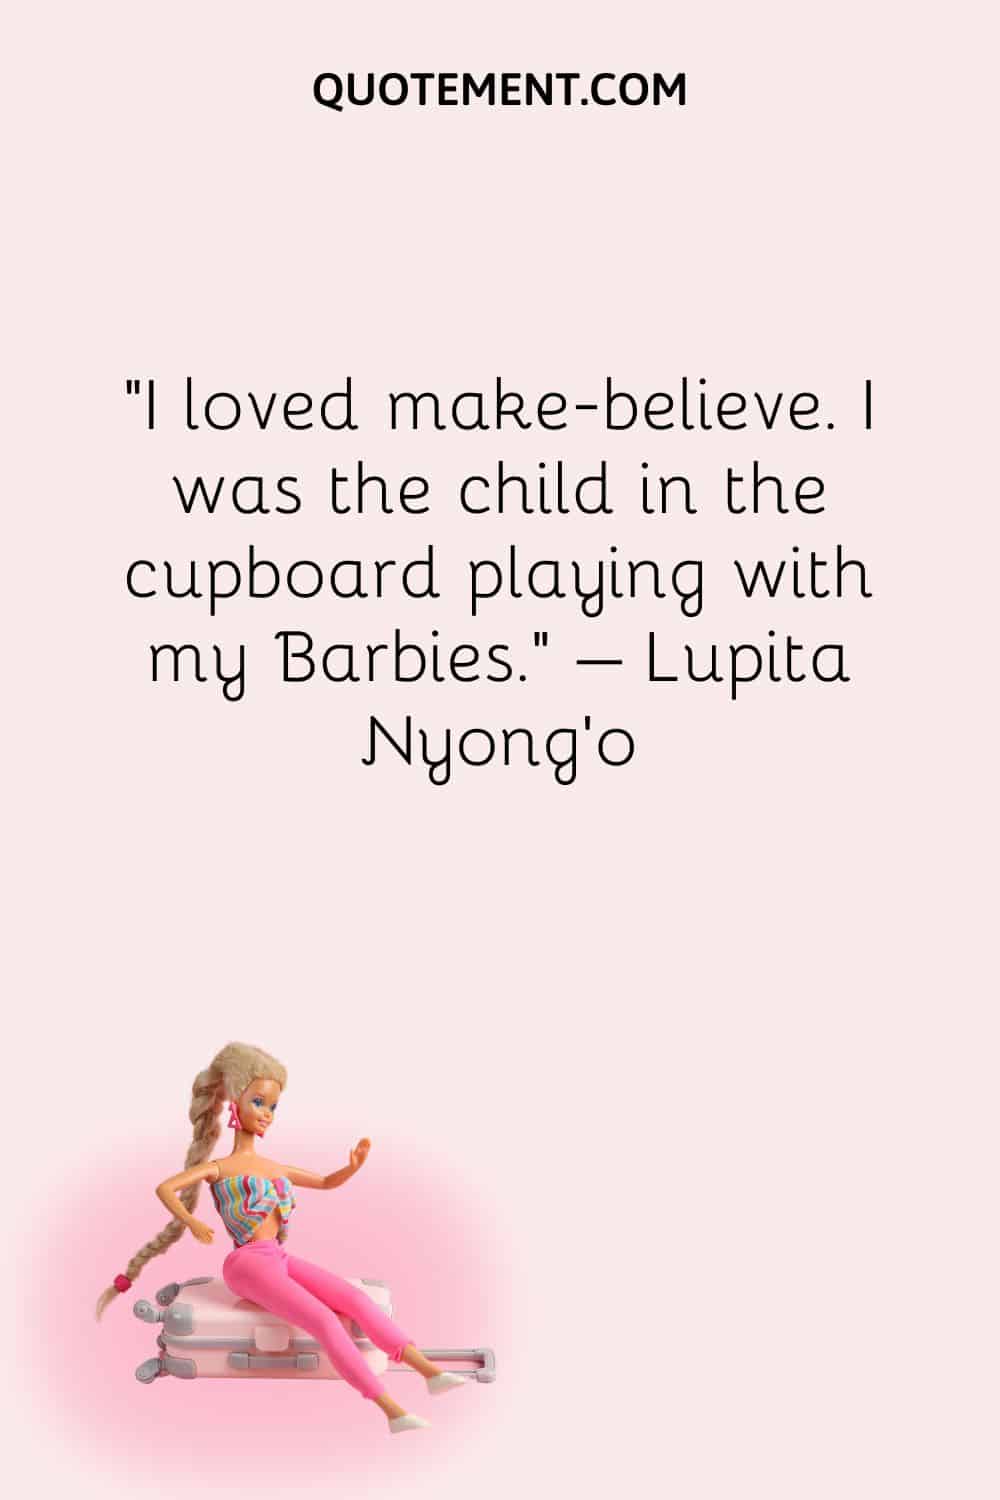 I loved make-believe. I was the child in the cupboard playing with my Barbies